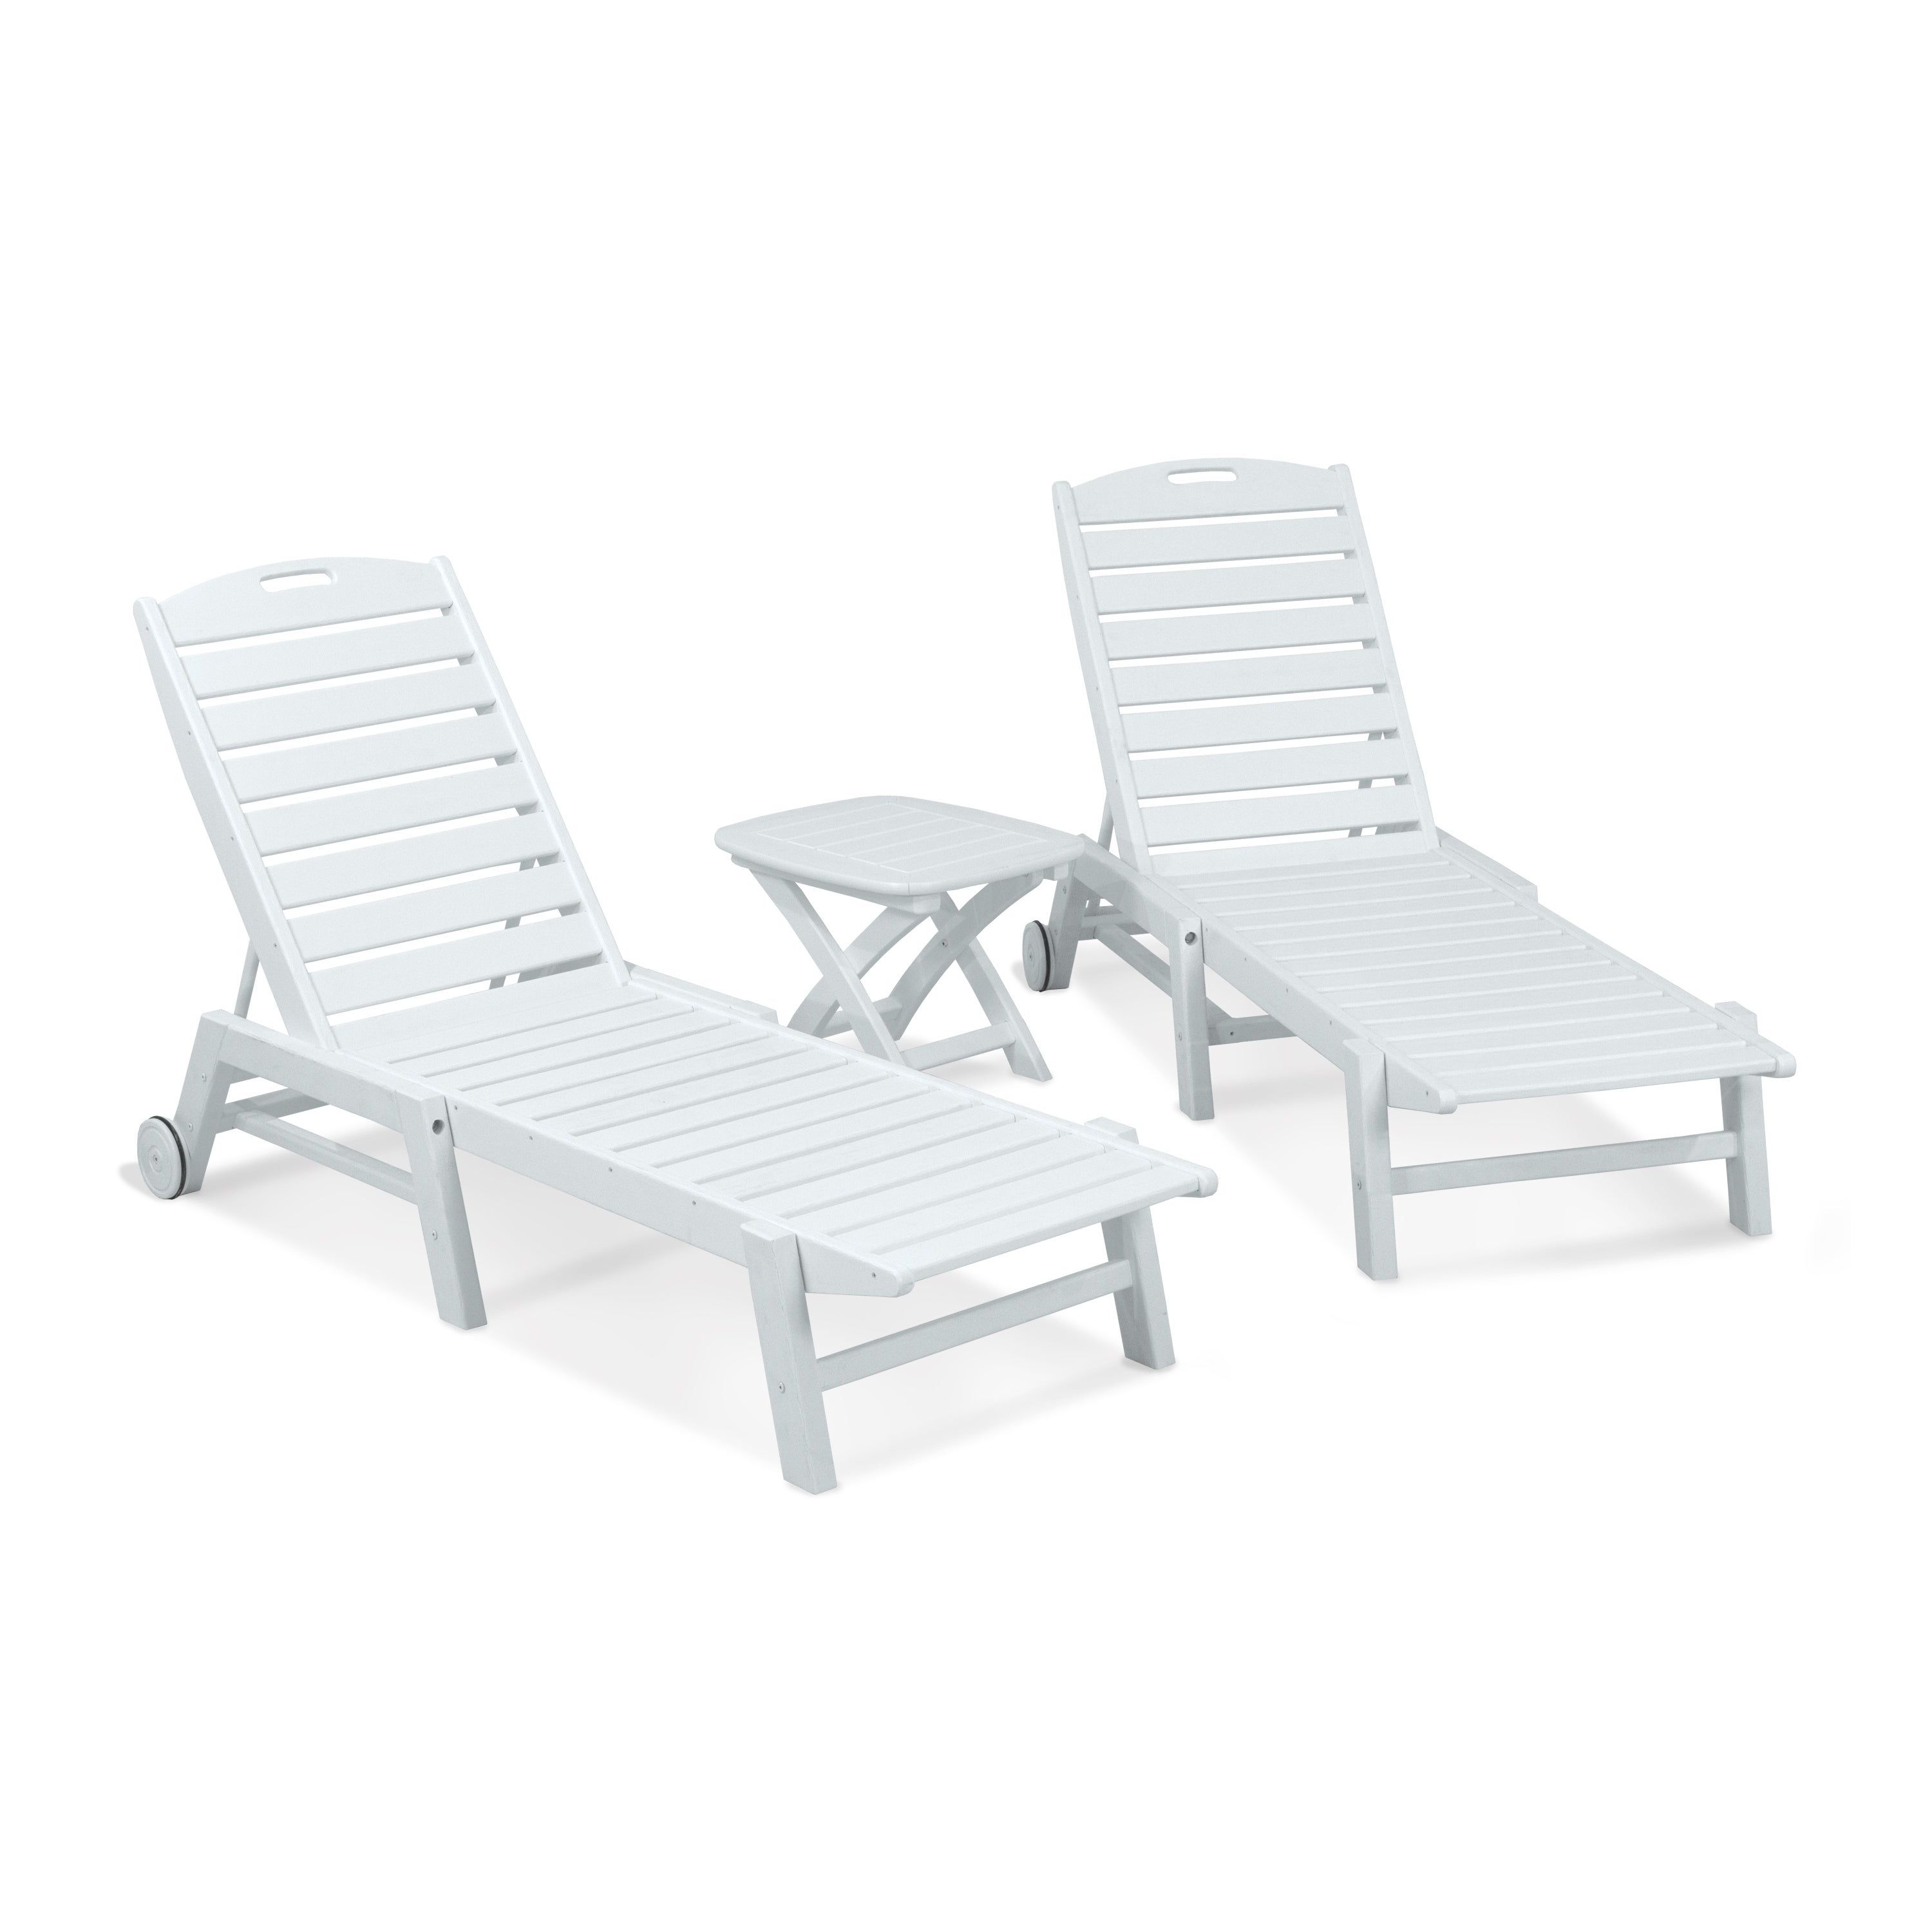 Polywood® Nautical 3 Piece Outdoor Chaise Lounge Set With Table With Fashionable Nautical 3 Piece Outdoor Chaise Lounge Sets With Wheels And Table (View 6 of 25)